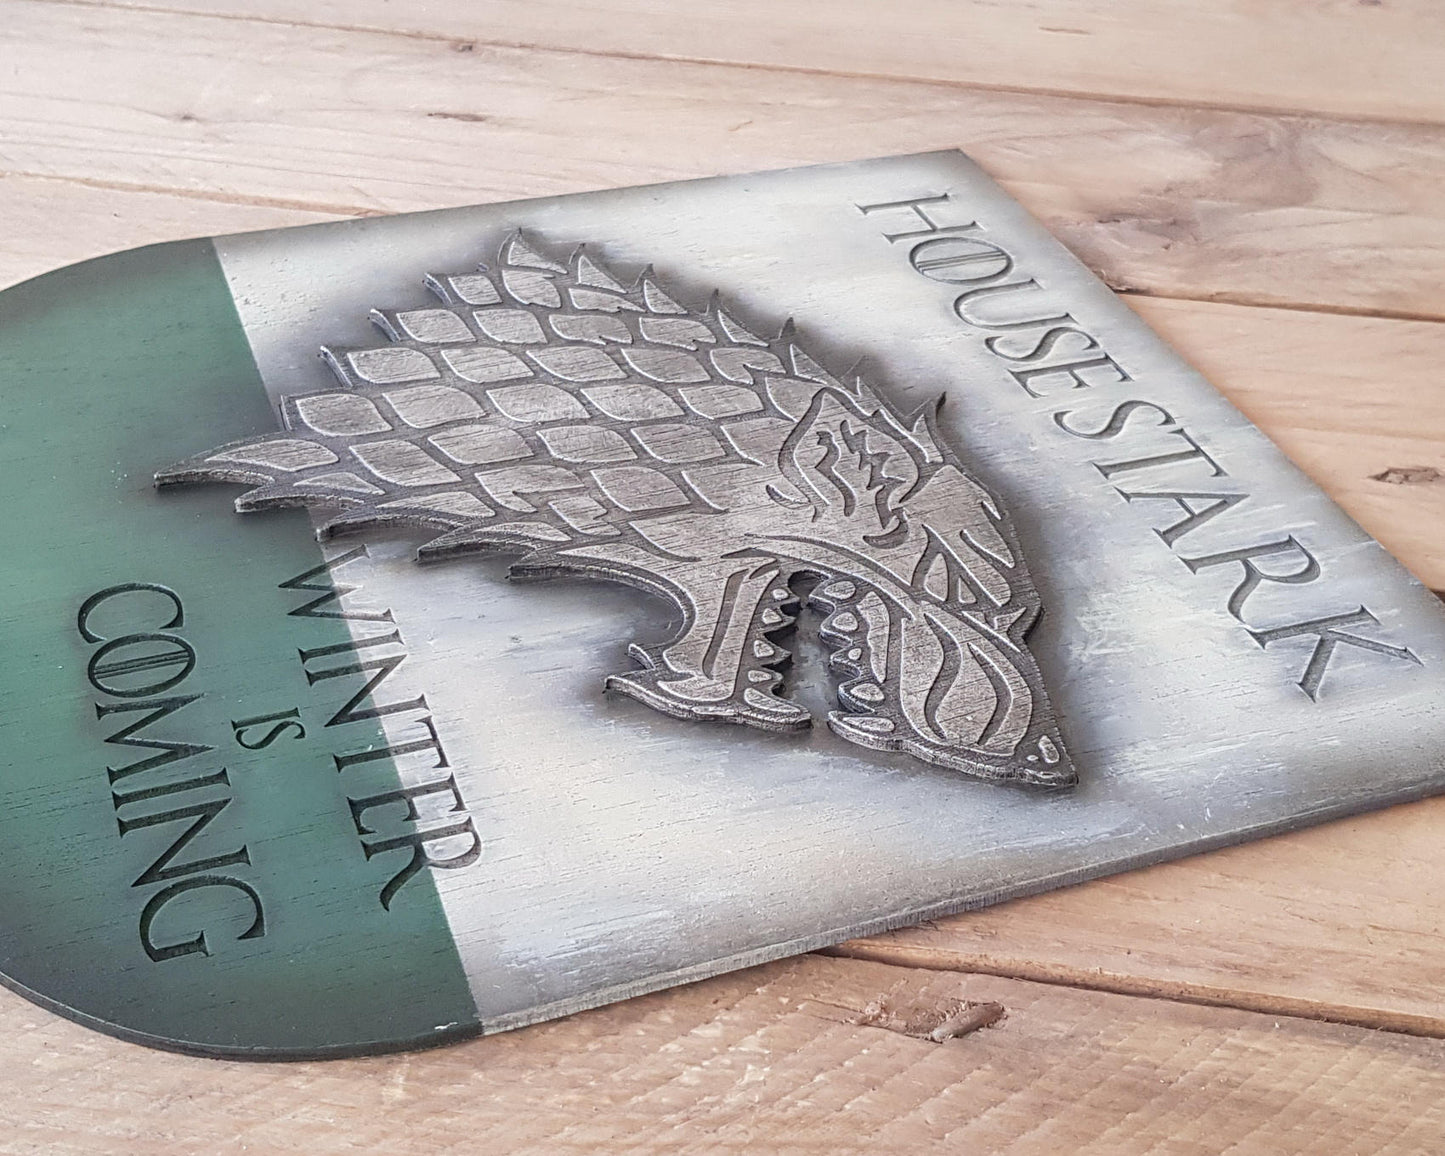 House Stark Game of Thrones Banner wood sign.